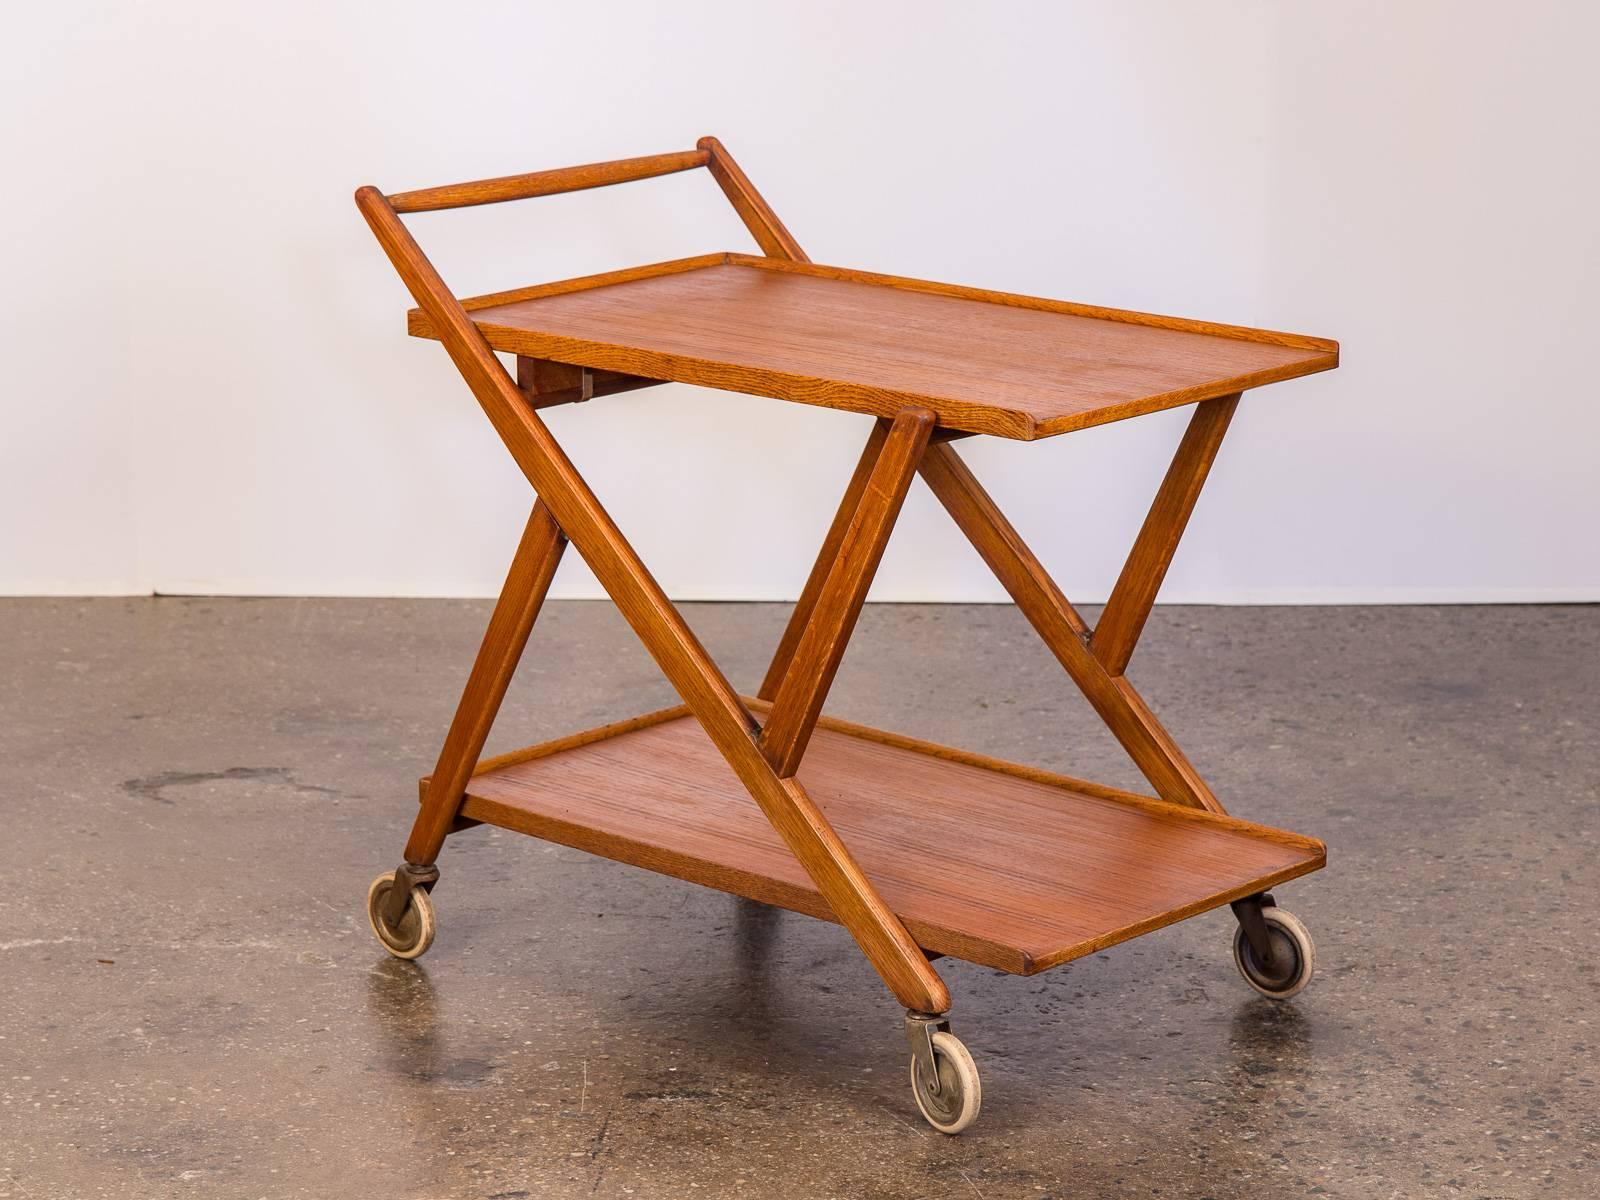 1960s Danish modern teak bar cart trolley in good vintage condition. This newly polished cart features two-tier trays for small plates or beverages. Great for entertaining or as a stationary side-table. When not in use, the collapsible ability makes